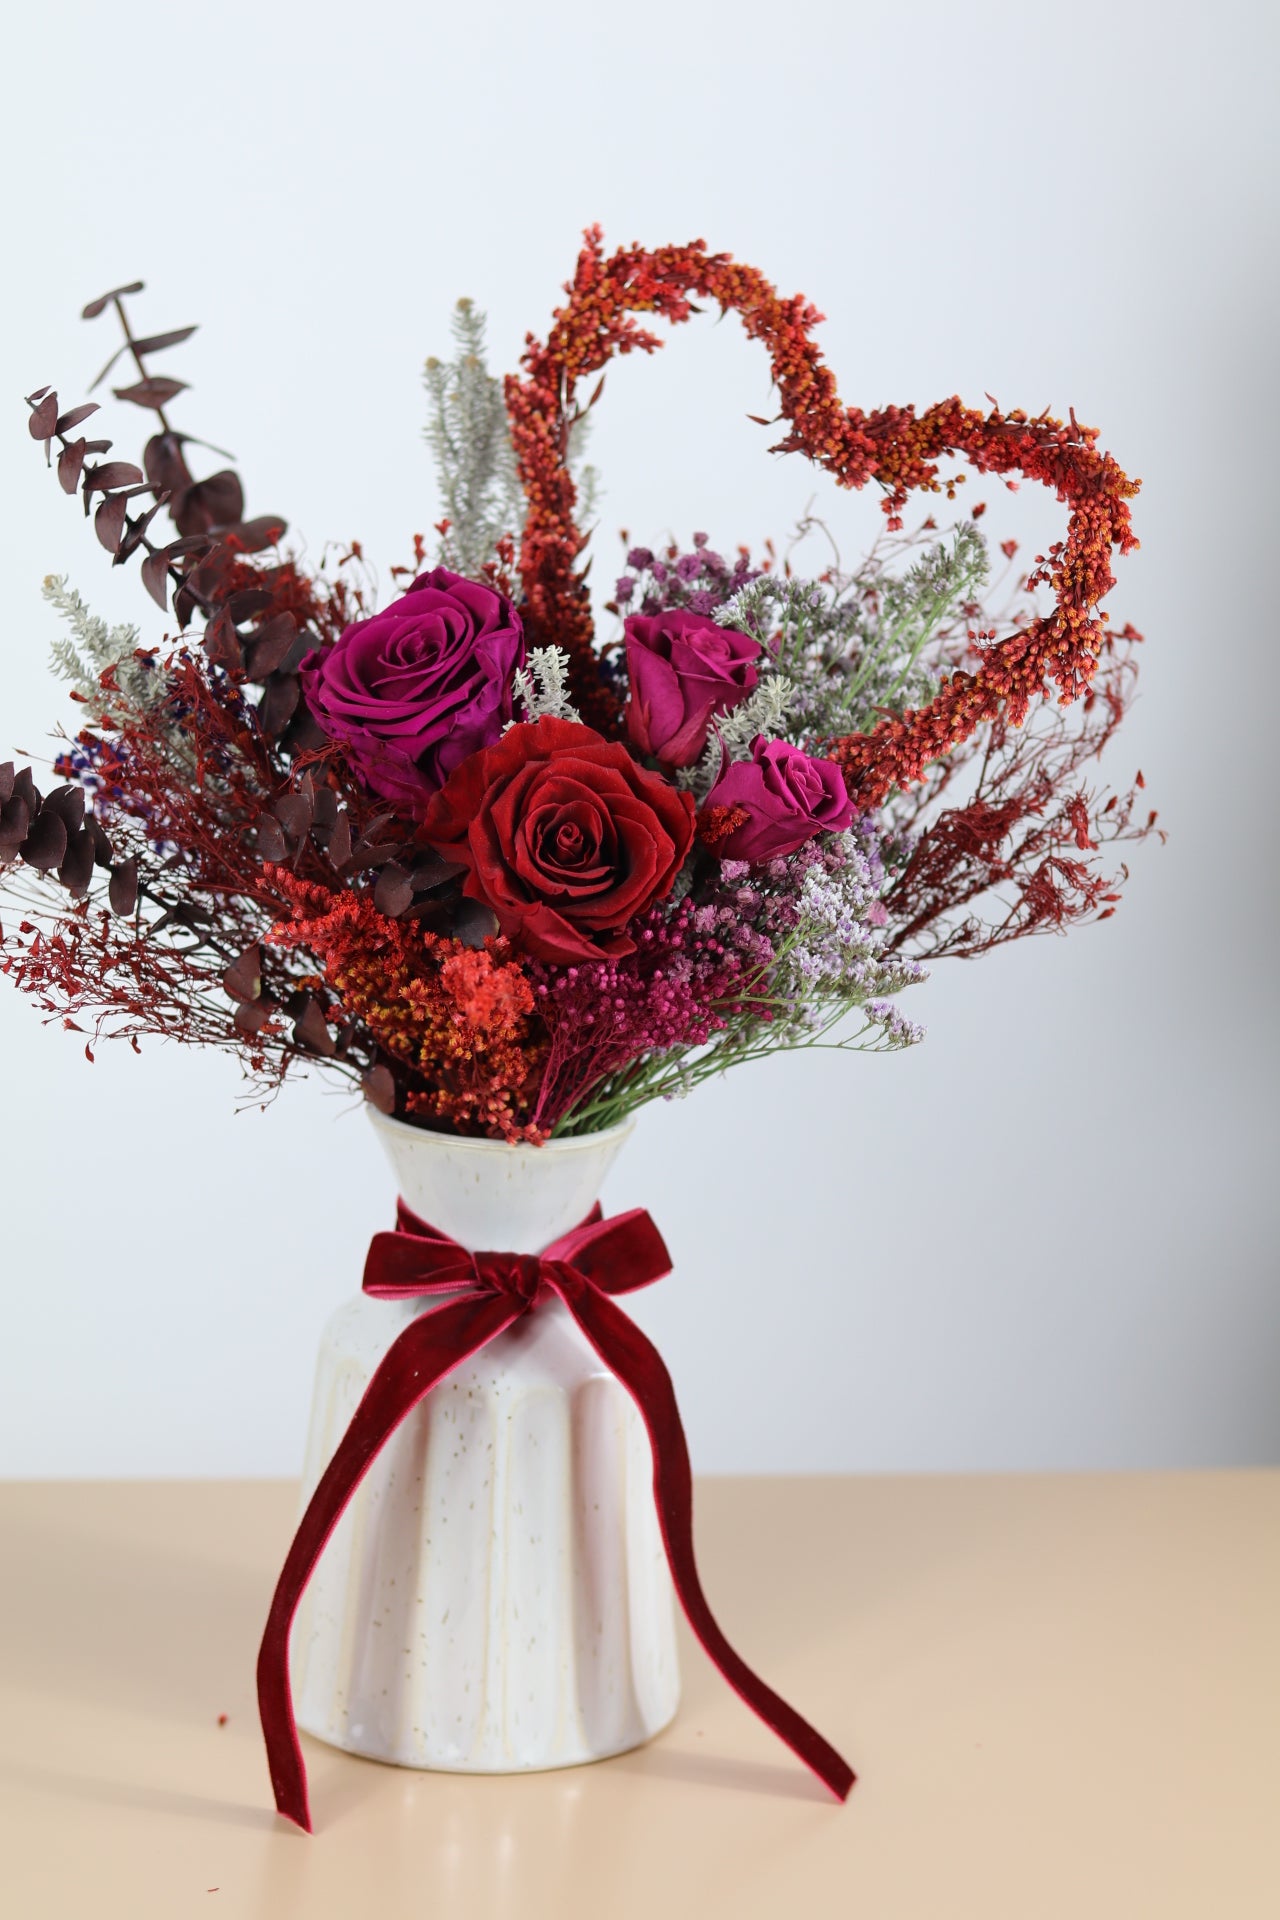 Valentine’s Day Collection - Be My Heart Petite Bouquet (Plum/Burgundy tone)